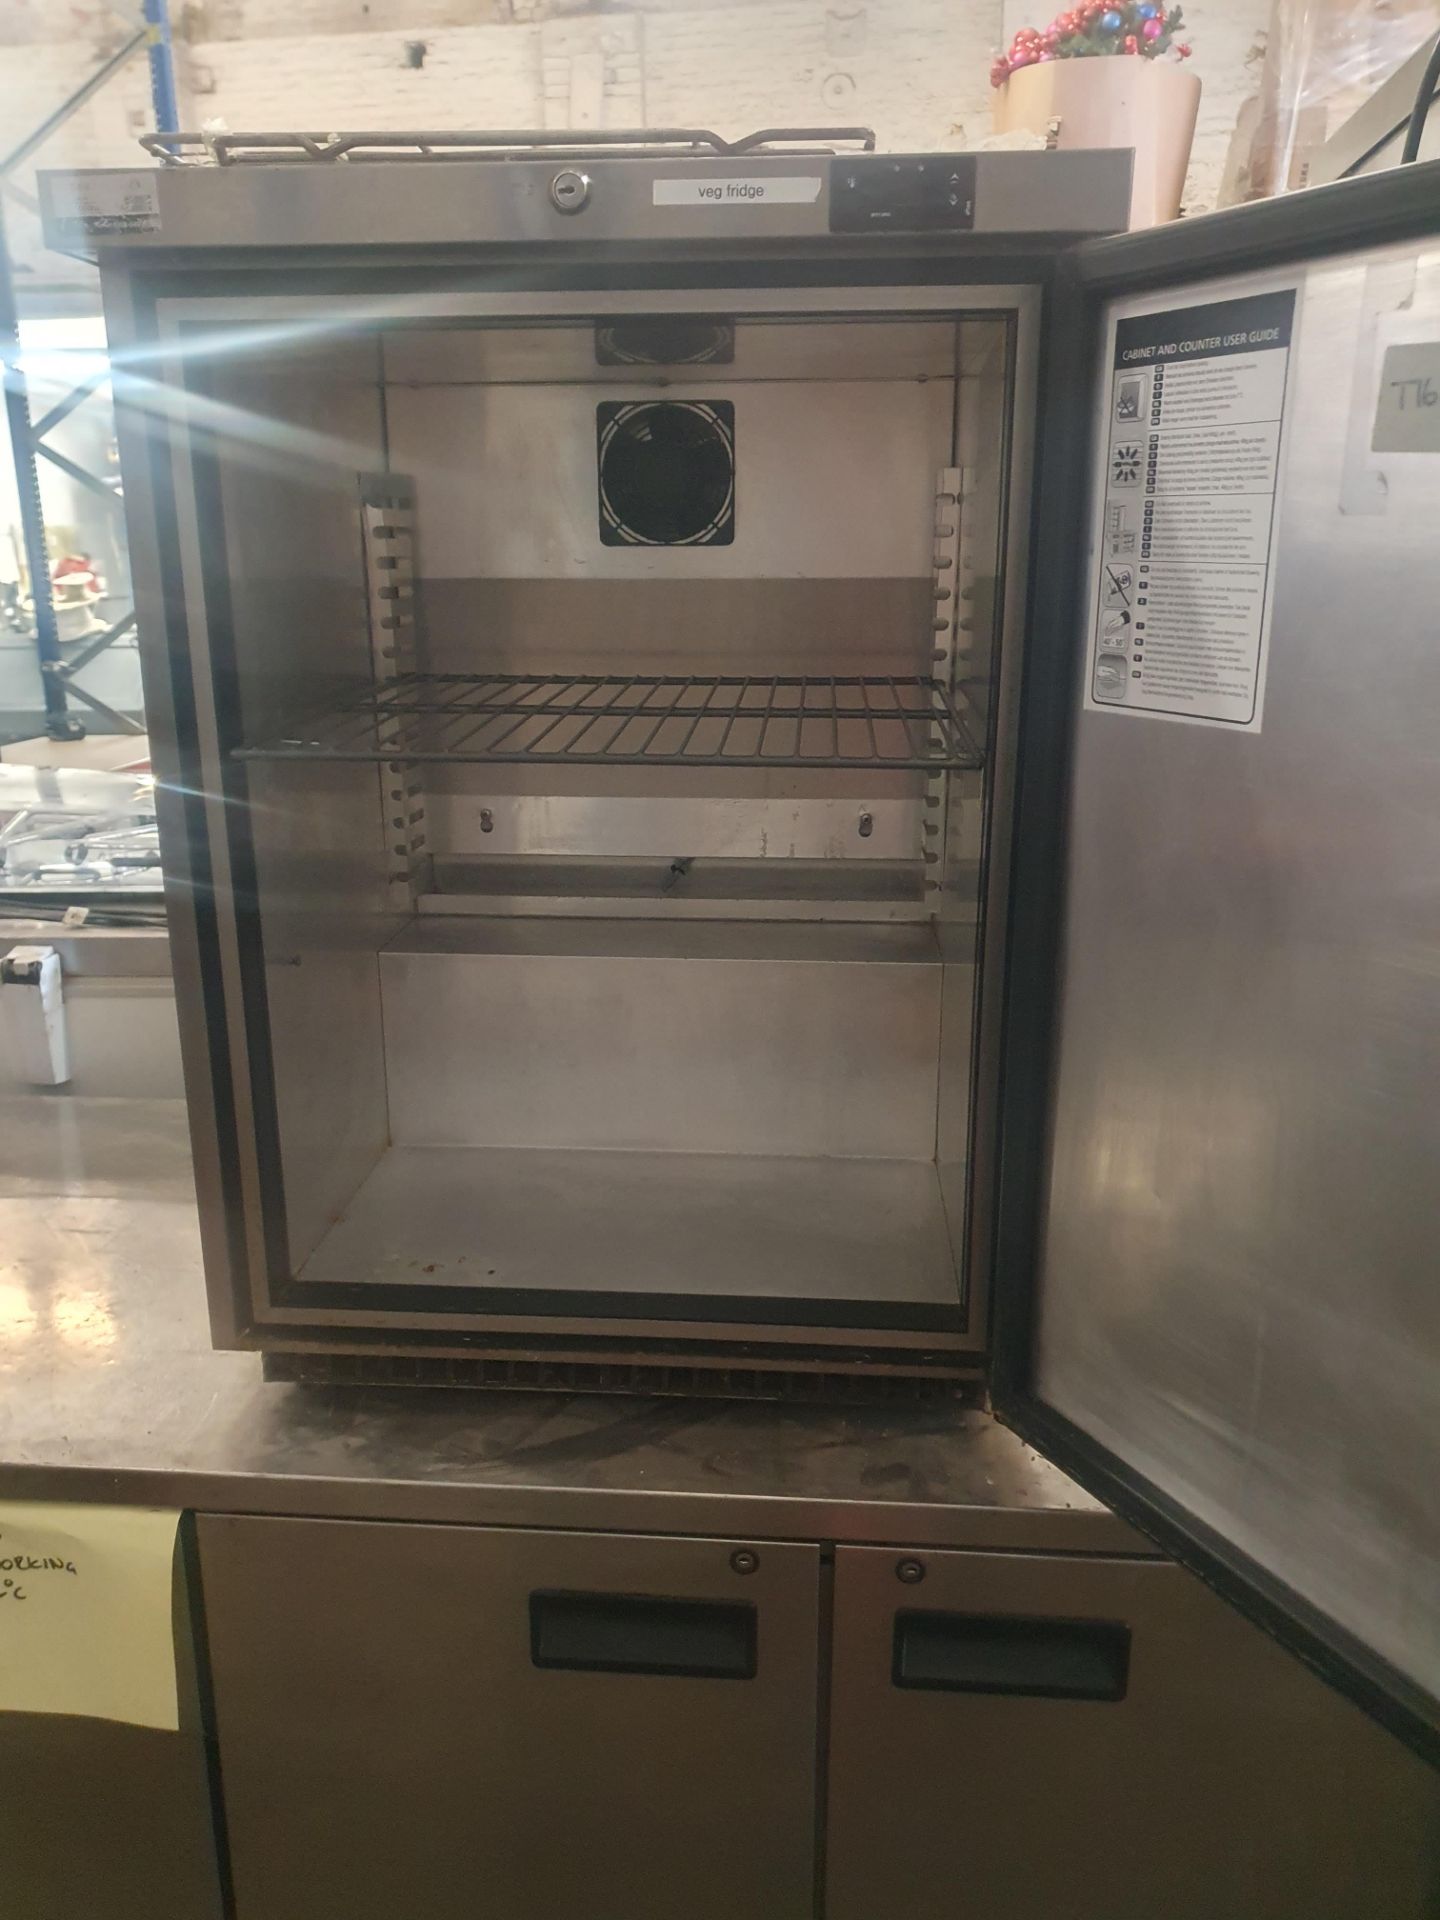 * Foster HR150 undercounter fridge - tested working - Image 2 of 3